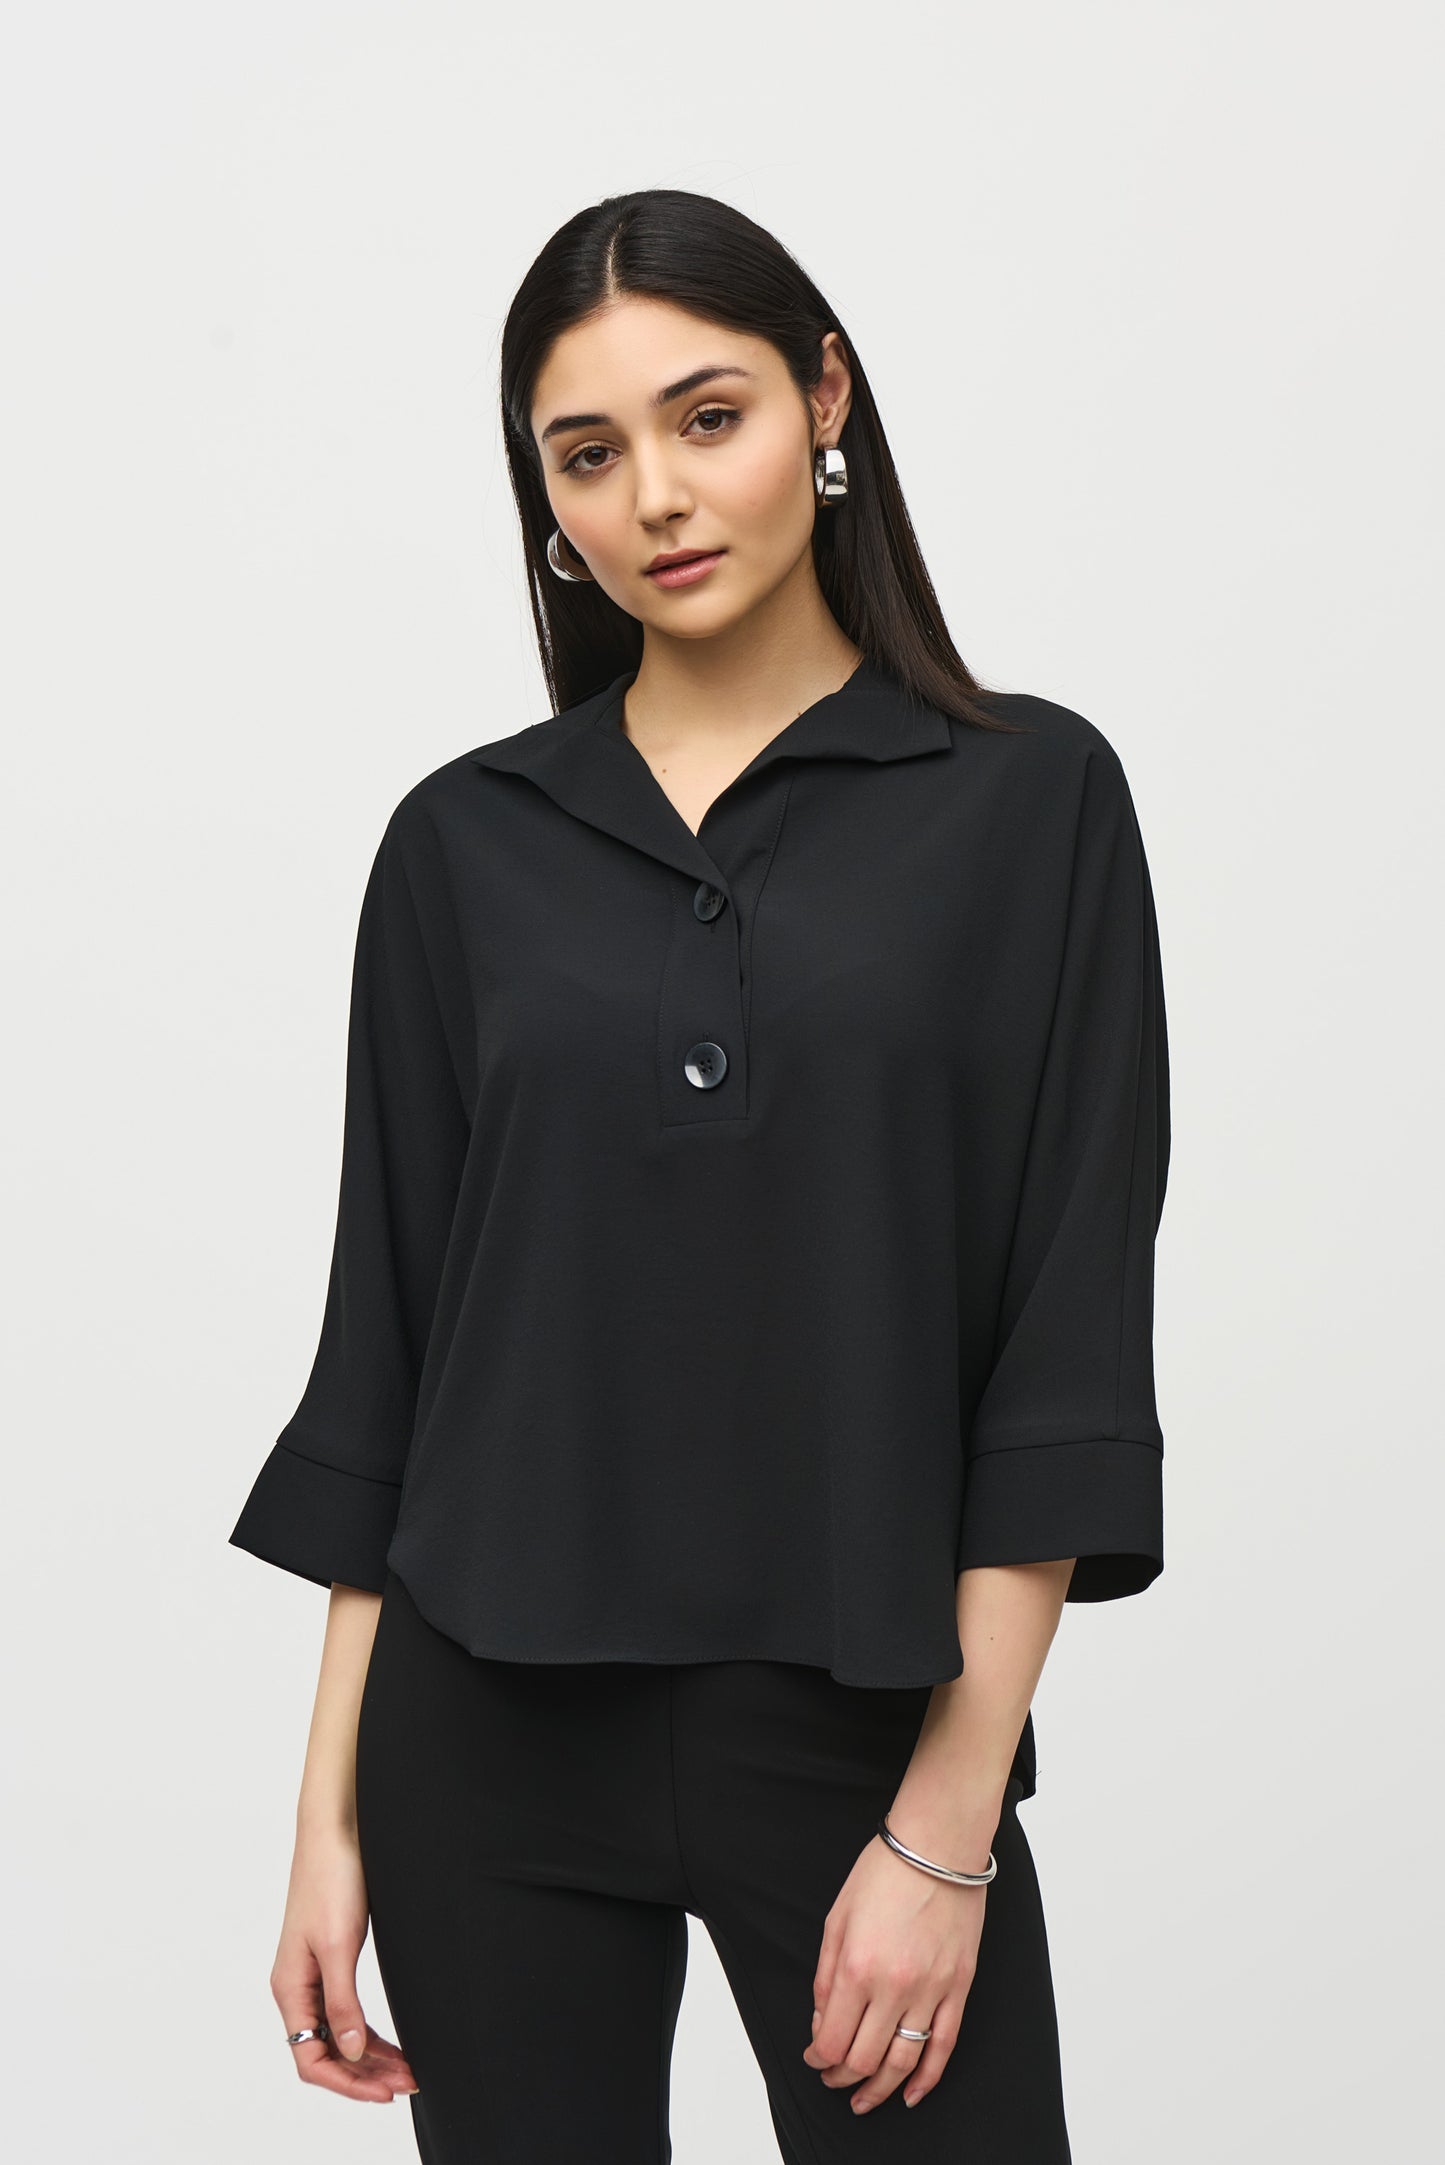 Woven Buttoned Collar Boxy Top
242057